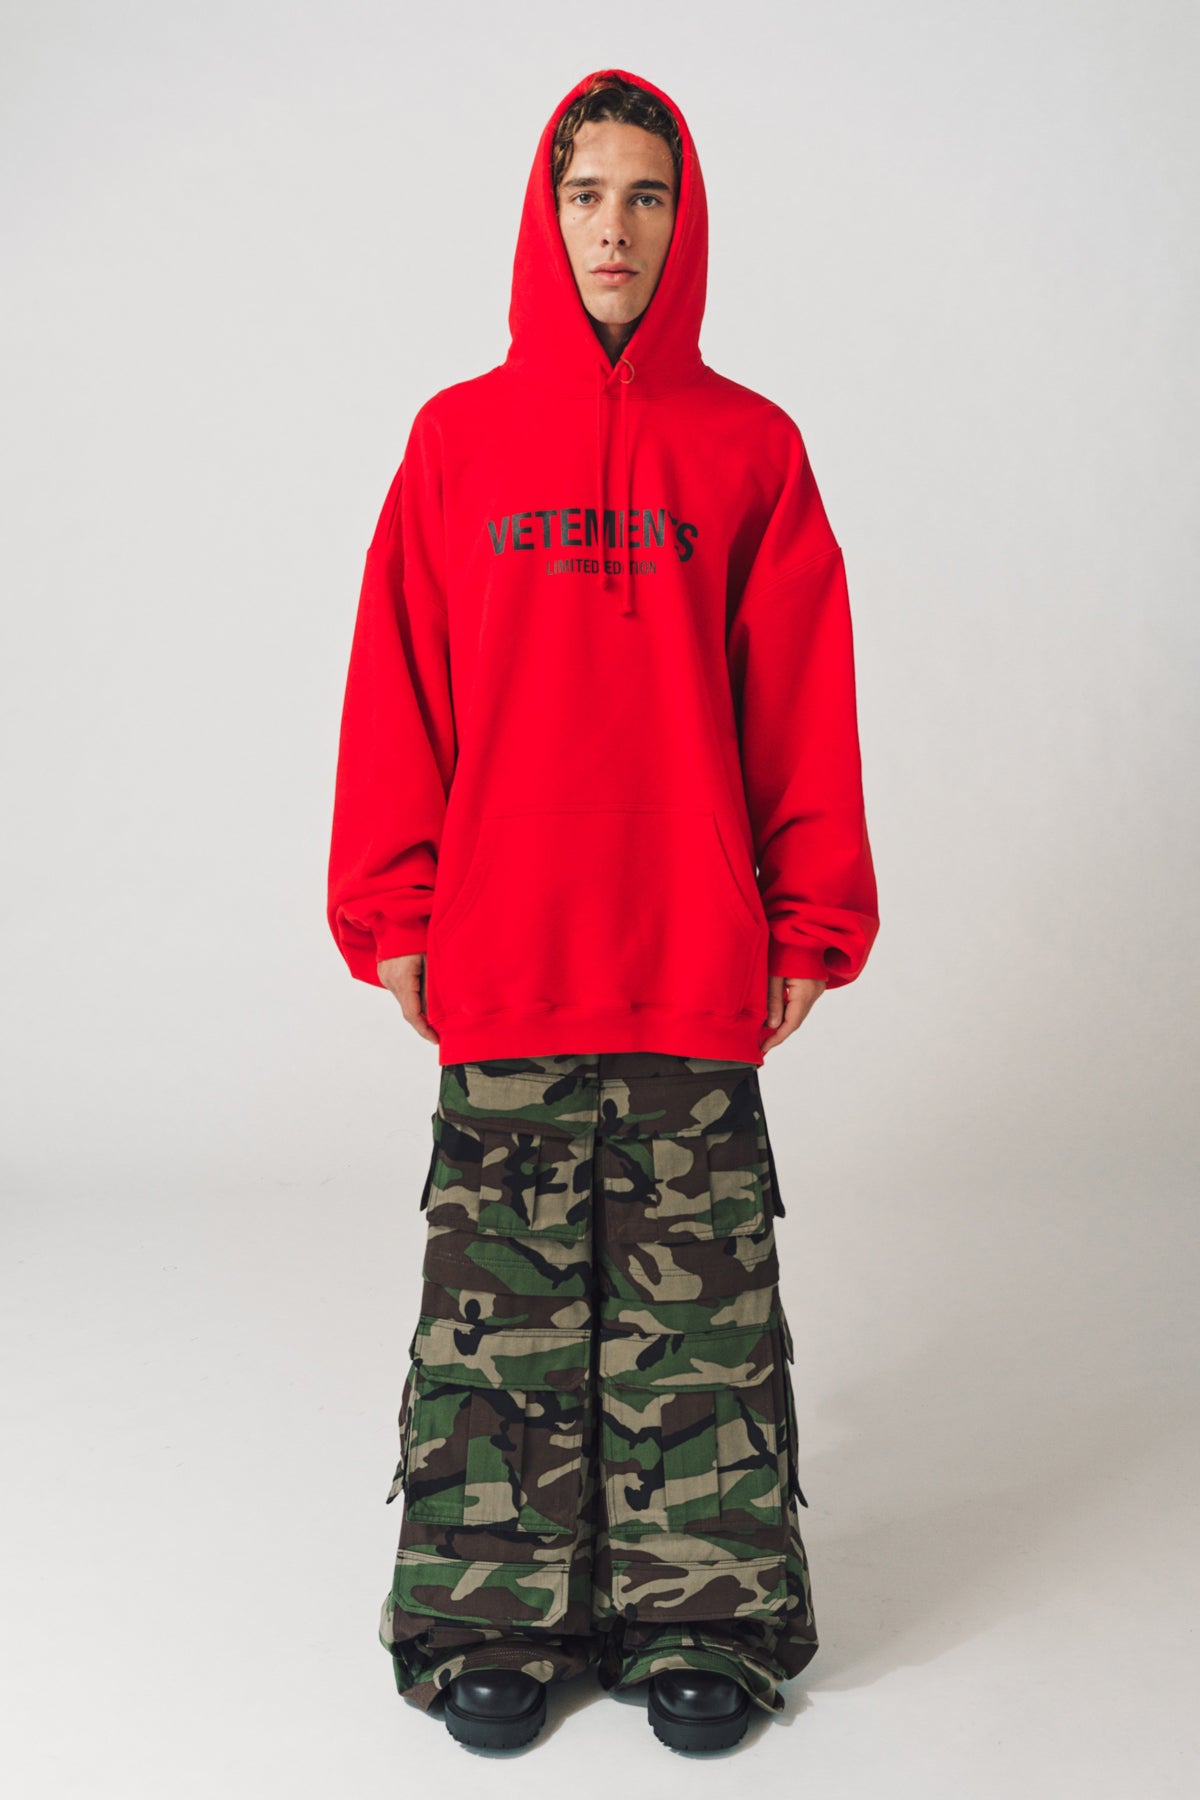 VETEMENTS | LIMITED EDITION HOODIE